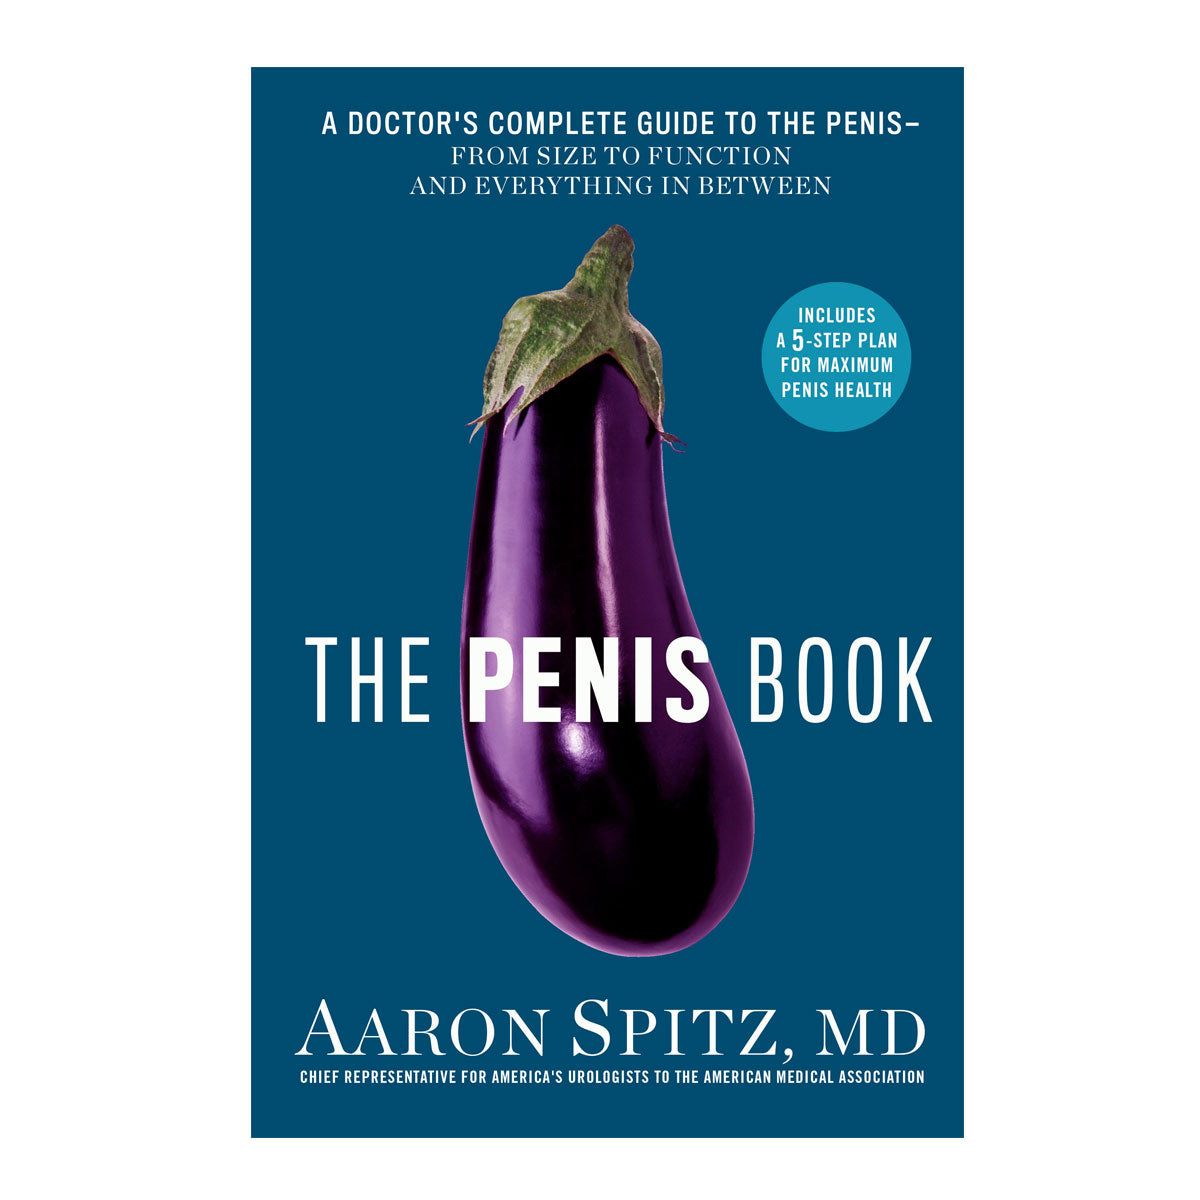 The Penis Book - A Doctors Guide to Complete Guide to The Penis